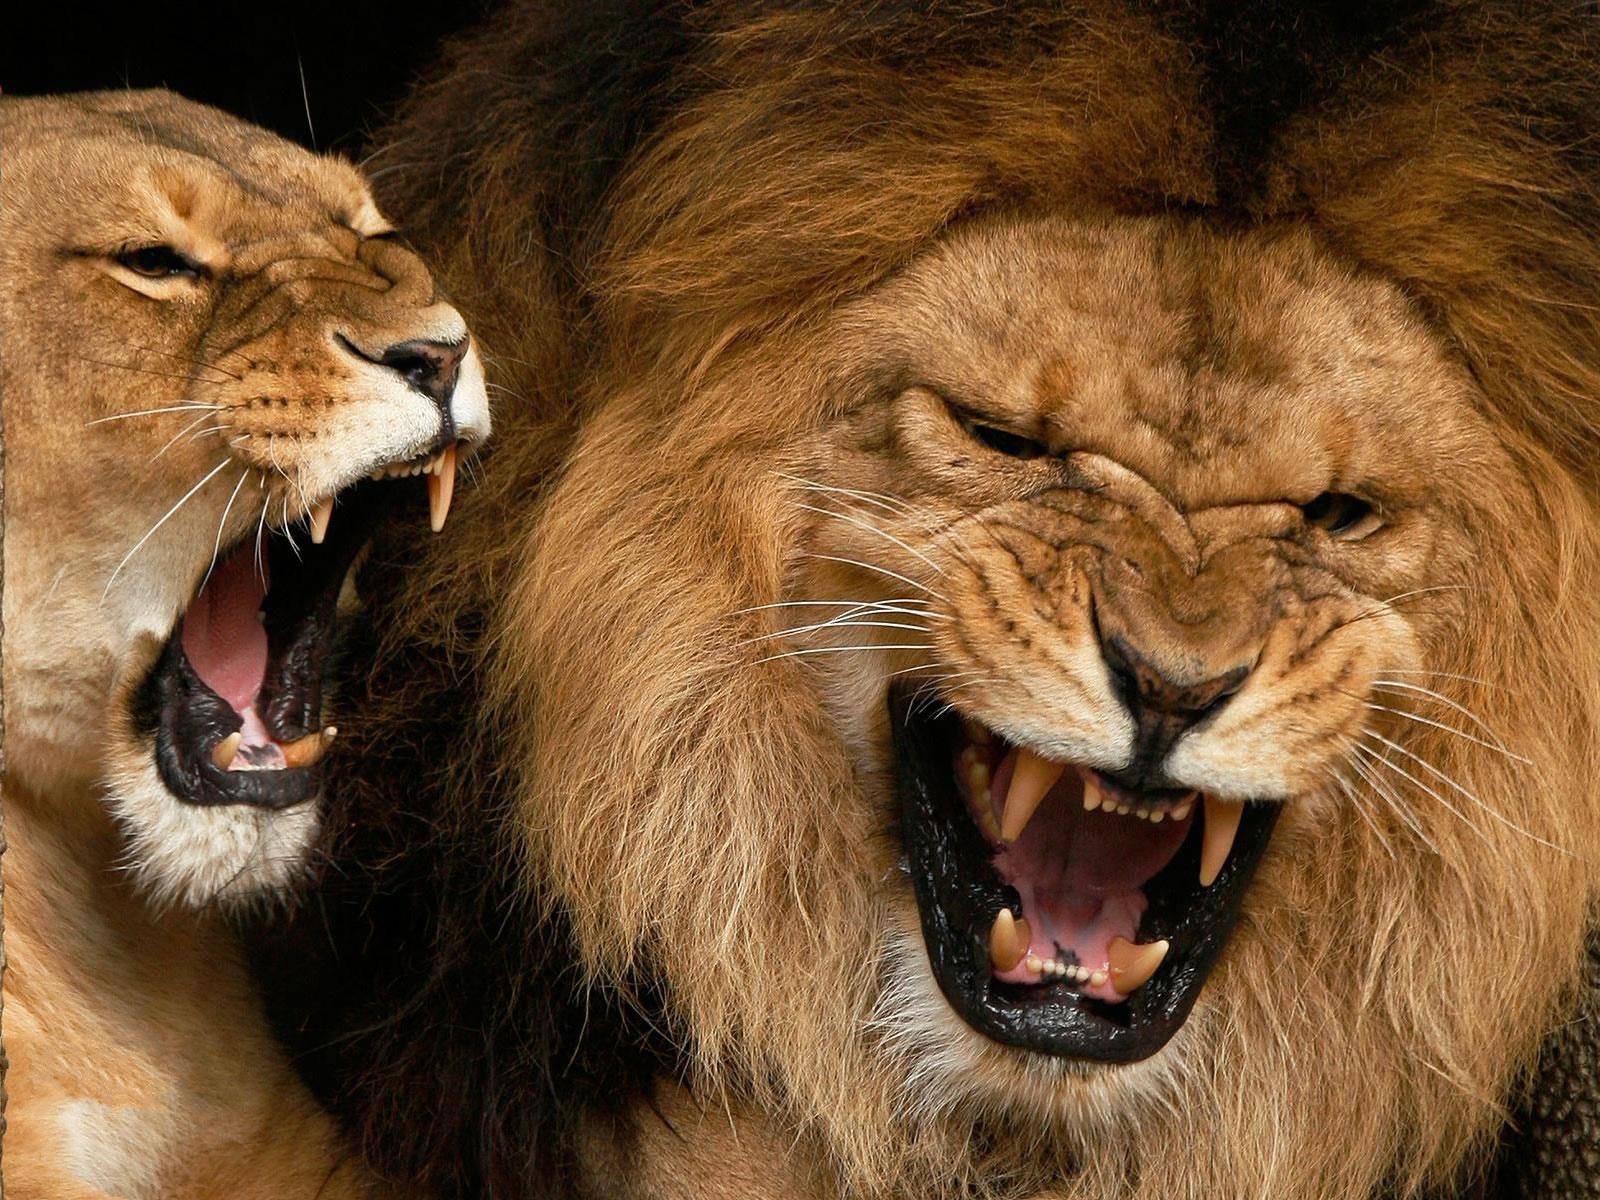 image of a roaring lion download